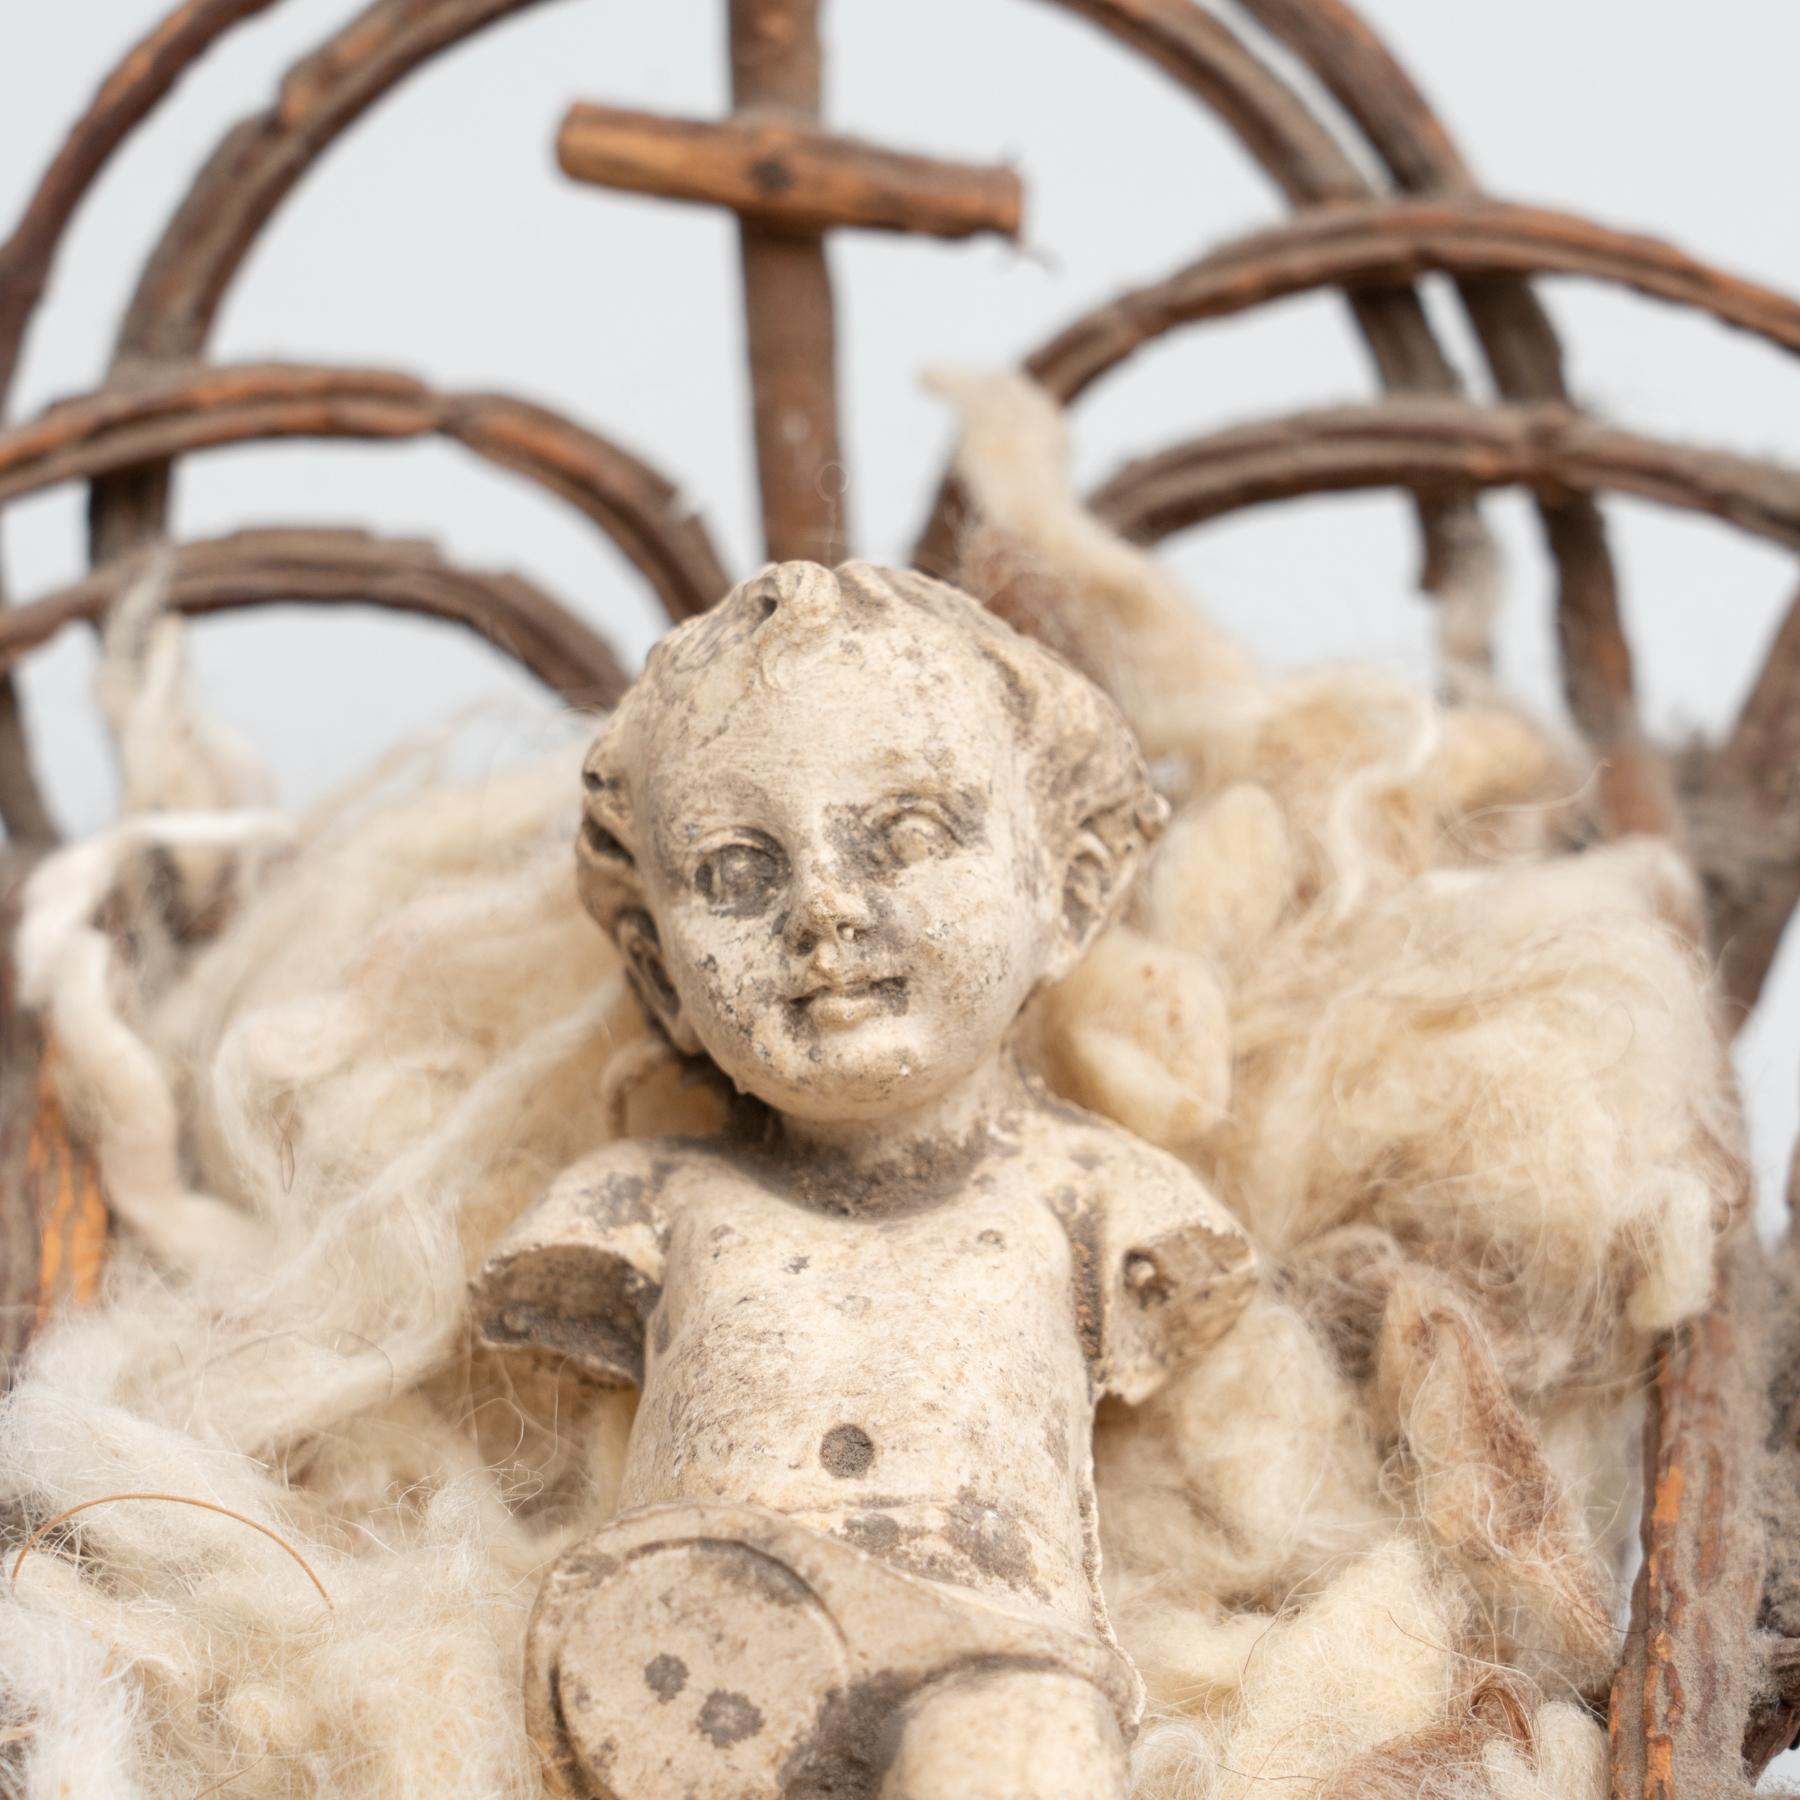 Mid-Century Modern Mid-20th Century Baby Jesus Figure in the Cradle For Sale